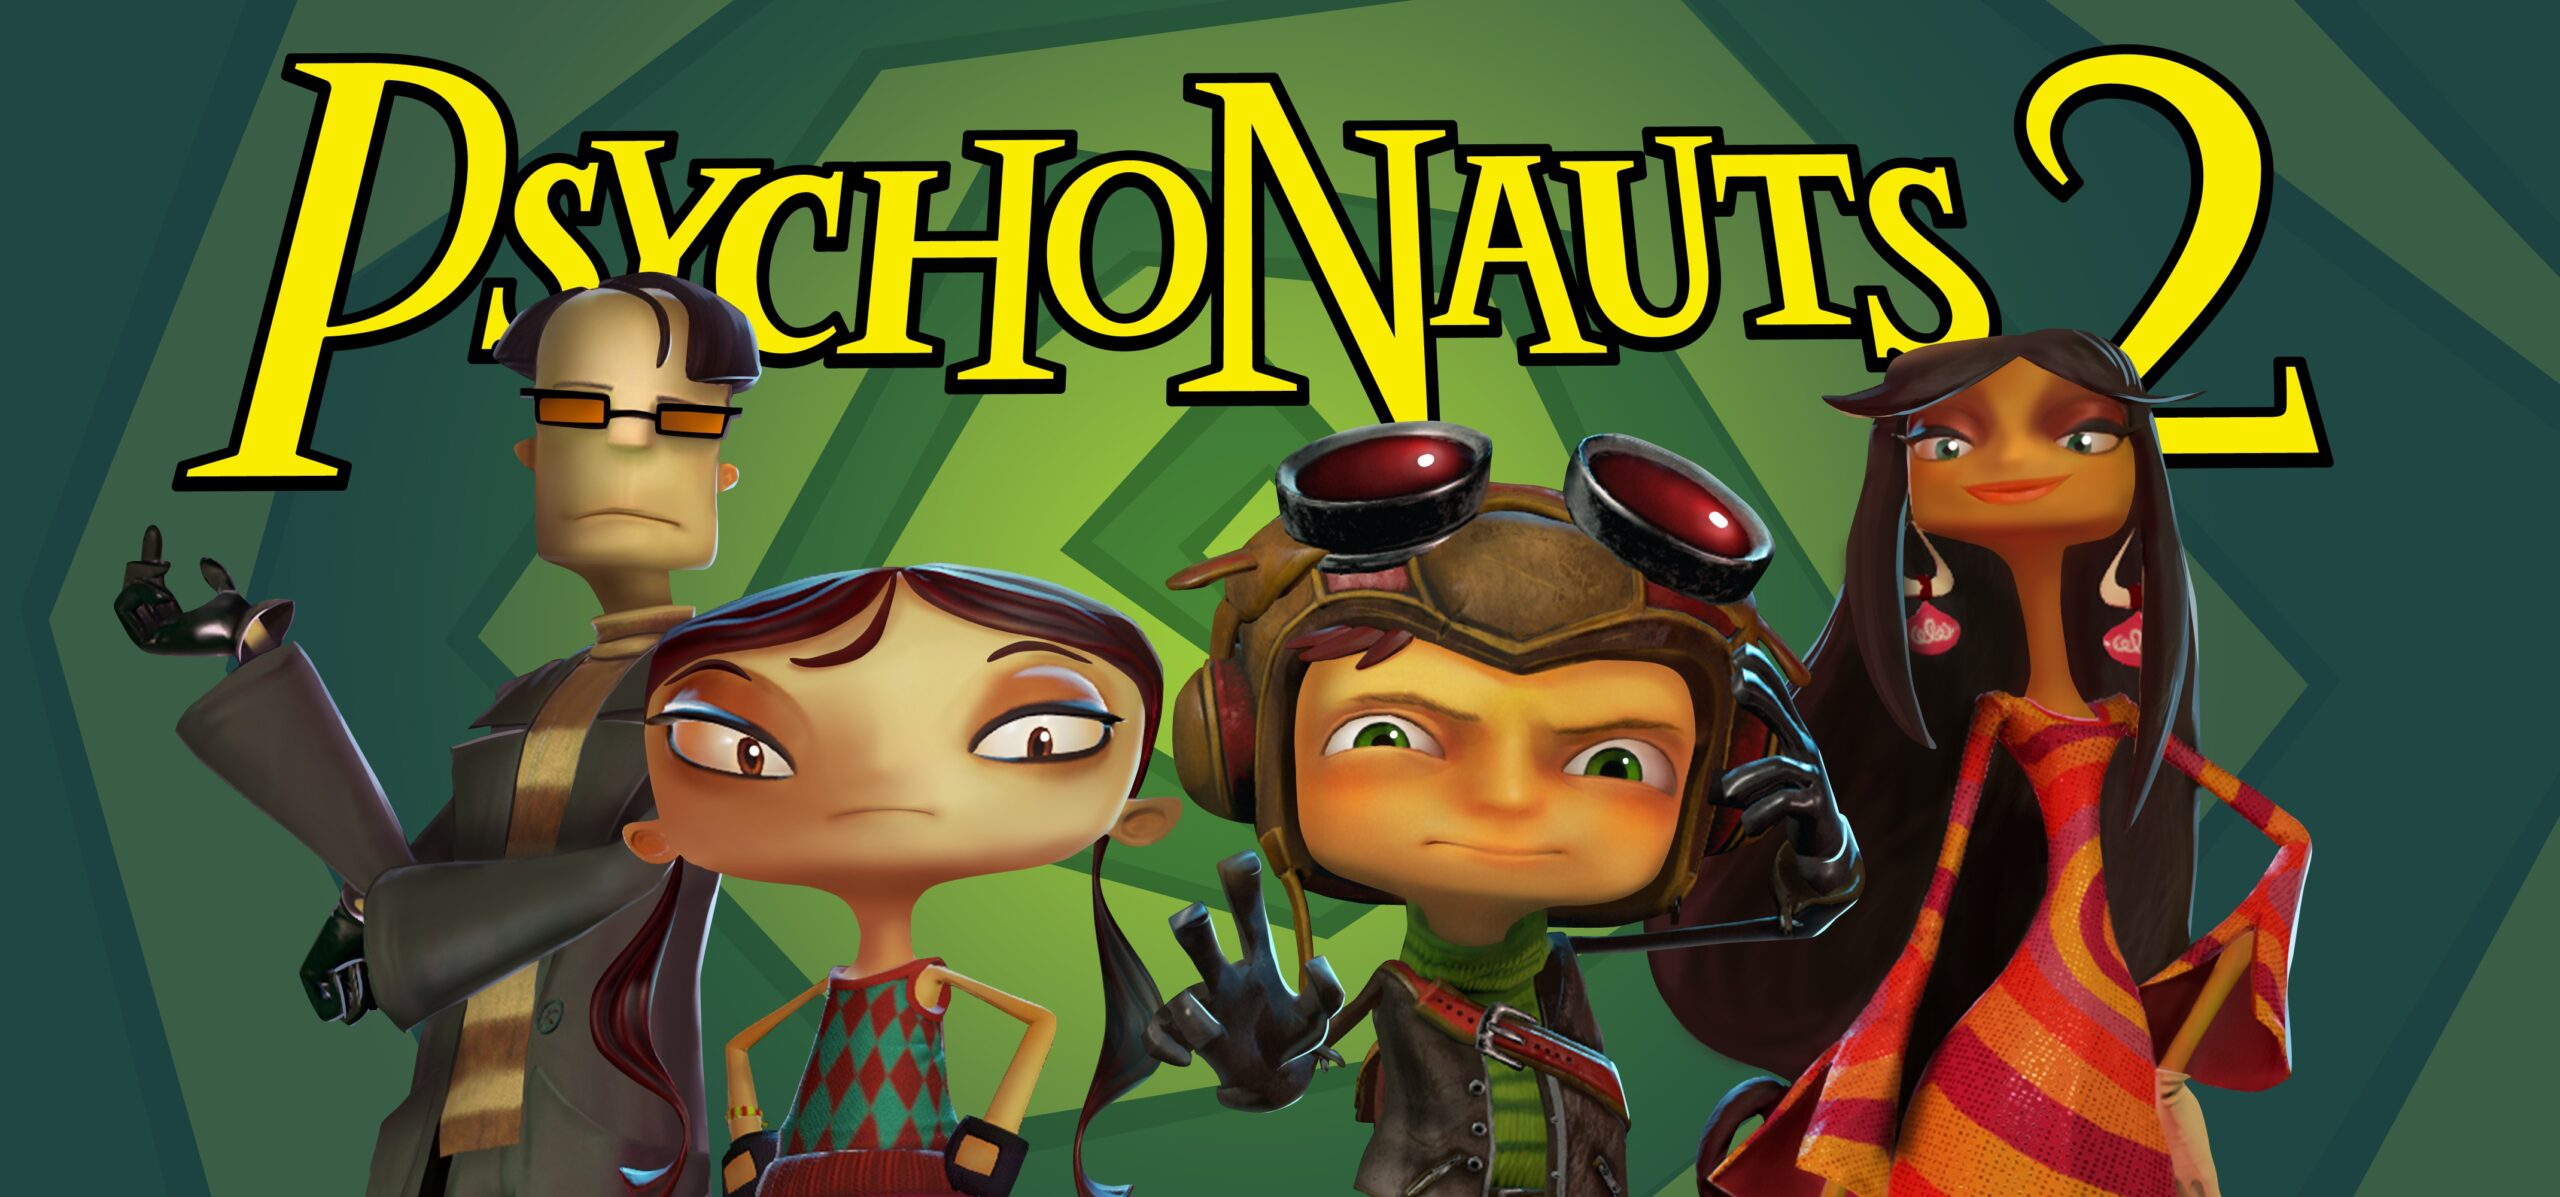 Psychonauts 2: Psychedelic tune sung by Jack Black